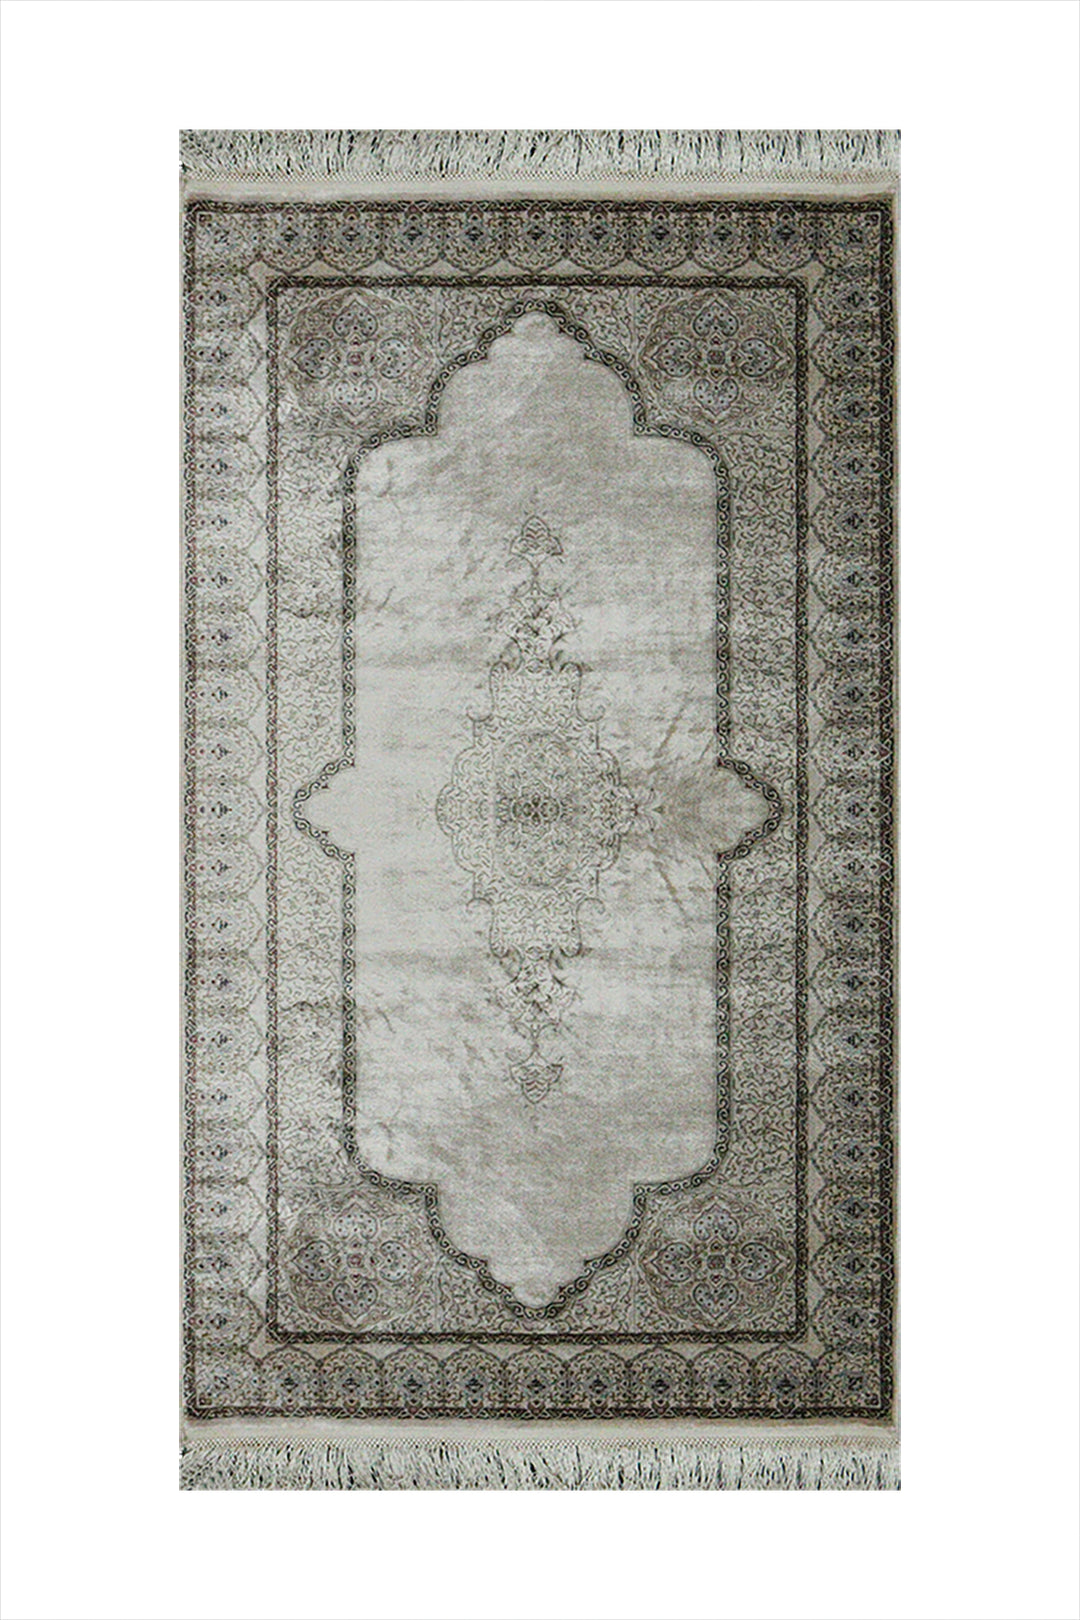 Turkish Premium  Ottoman Rug - Cream - 2.6 x 4.9 FT - Resilient Construction for Long-Lasting Use